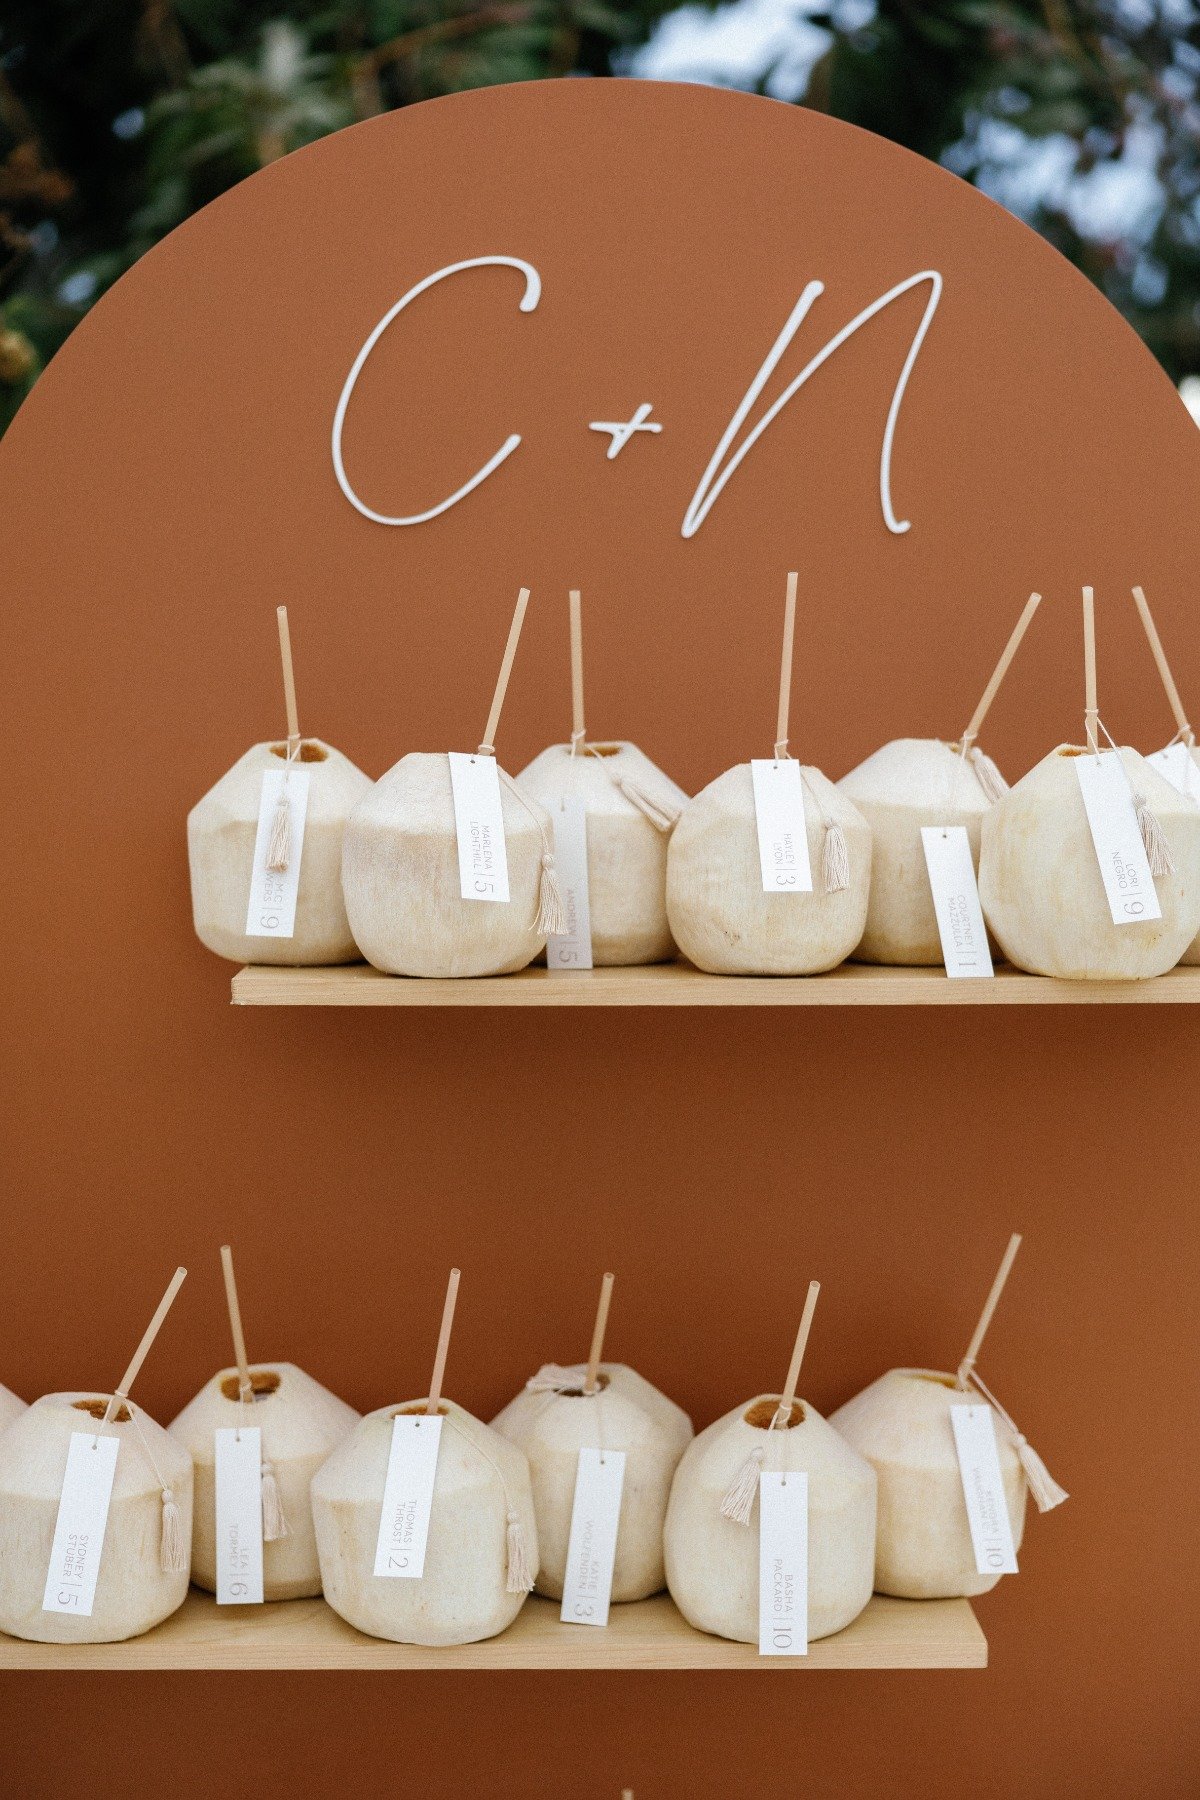 coconut drink seating chart wall